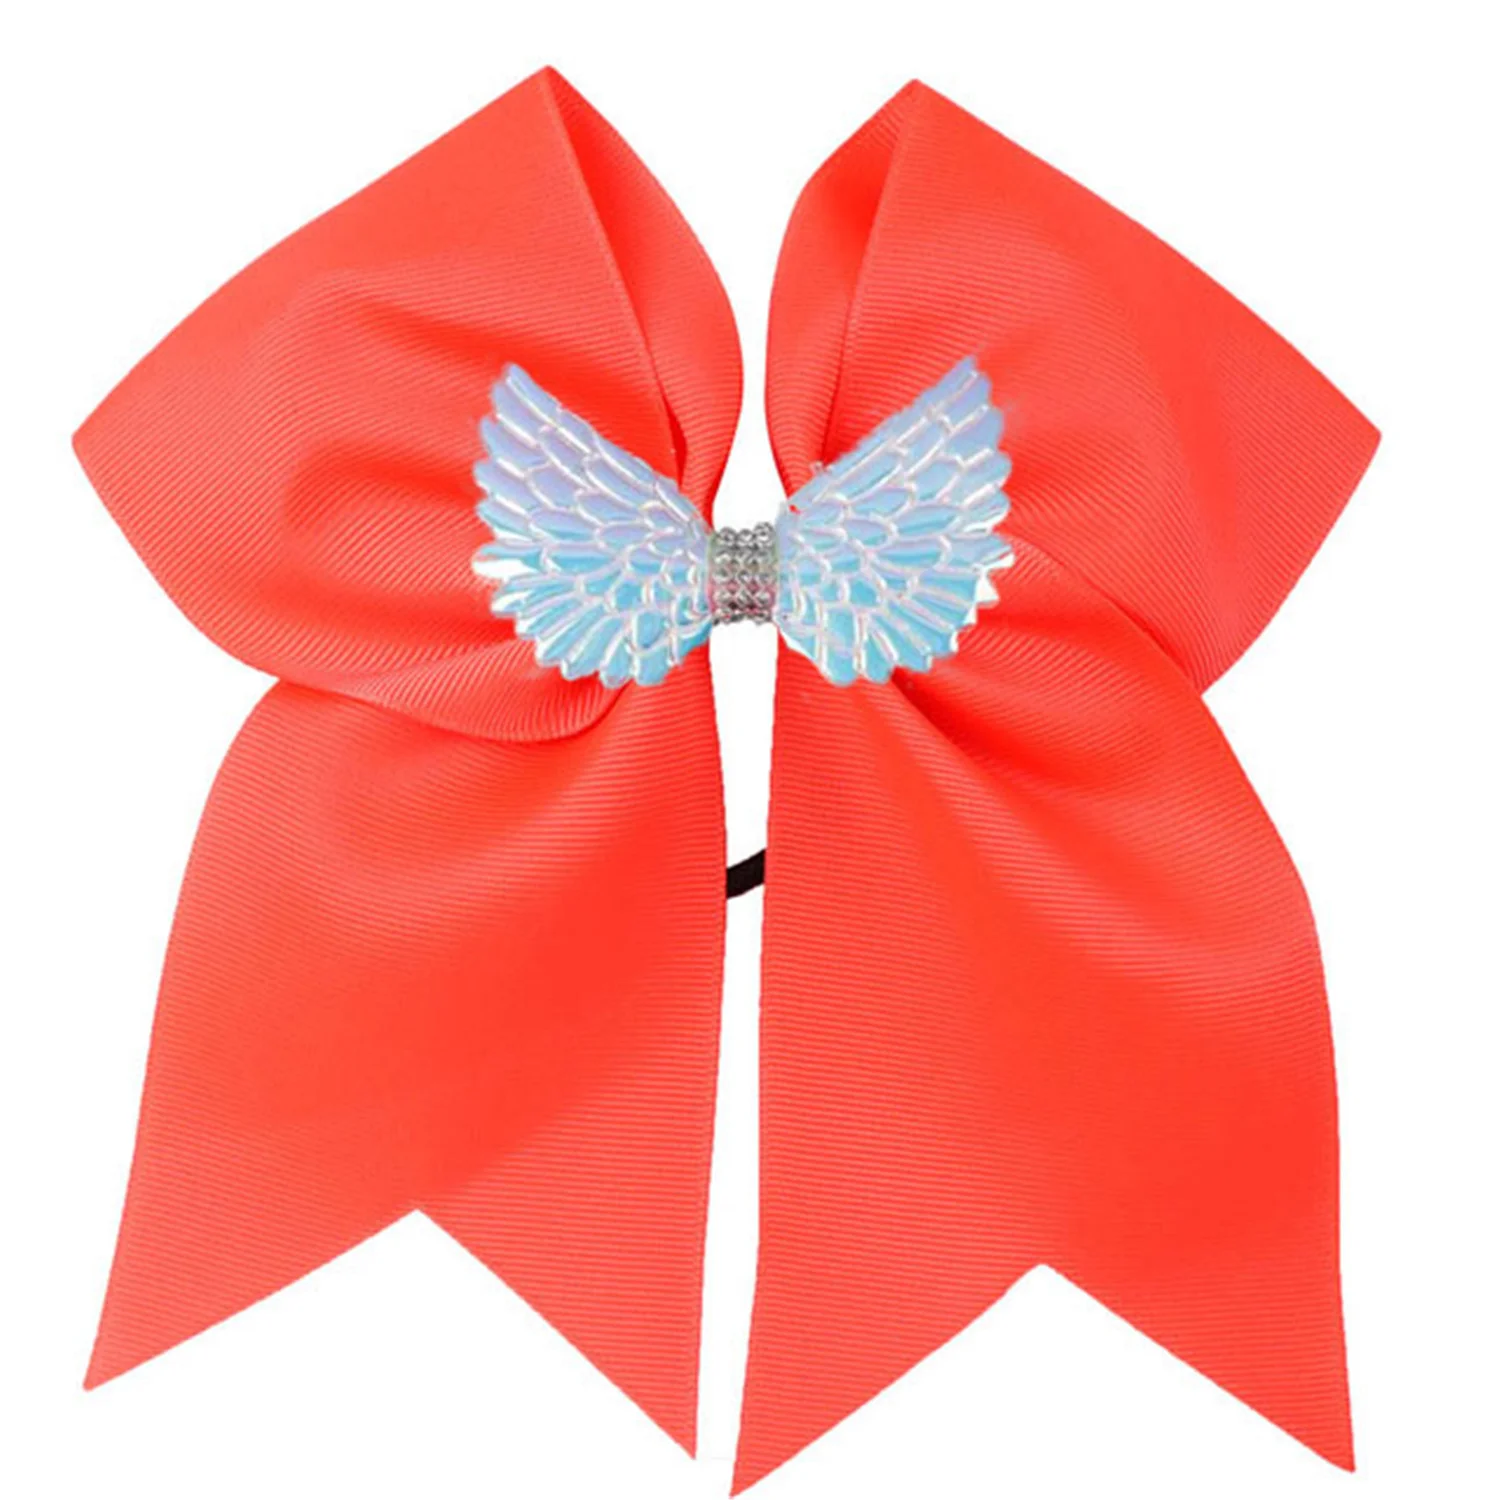 NEW 2pcs/ 7inch angel wings Hair Bow Girls Solid Cheer Bow With Elastic Band Cheerleader Hair Bands For Kids Hair Accessories cheerleader costume for school girls cheer uniforms outfits for halloween cosplay cheerleading dance dress with socks